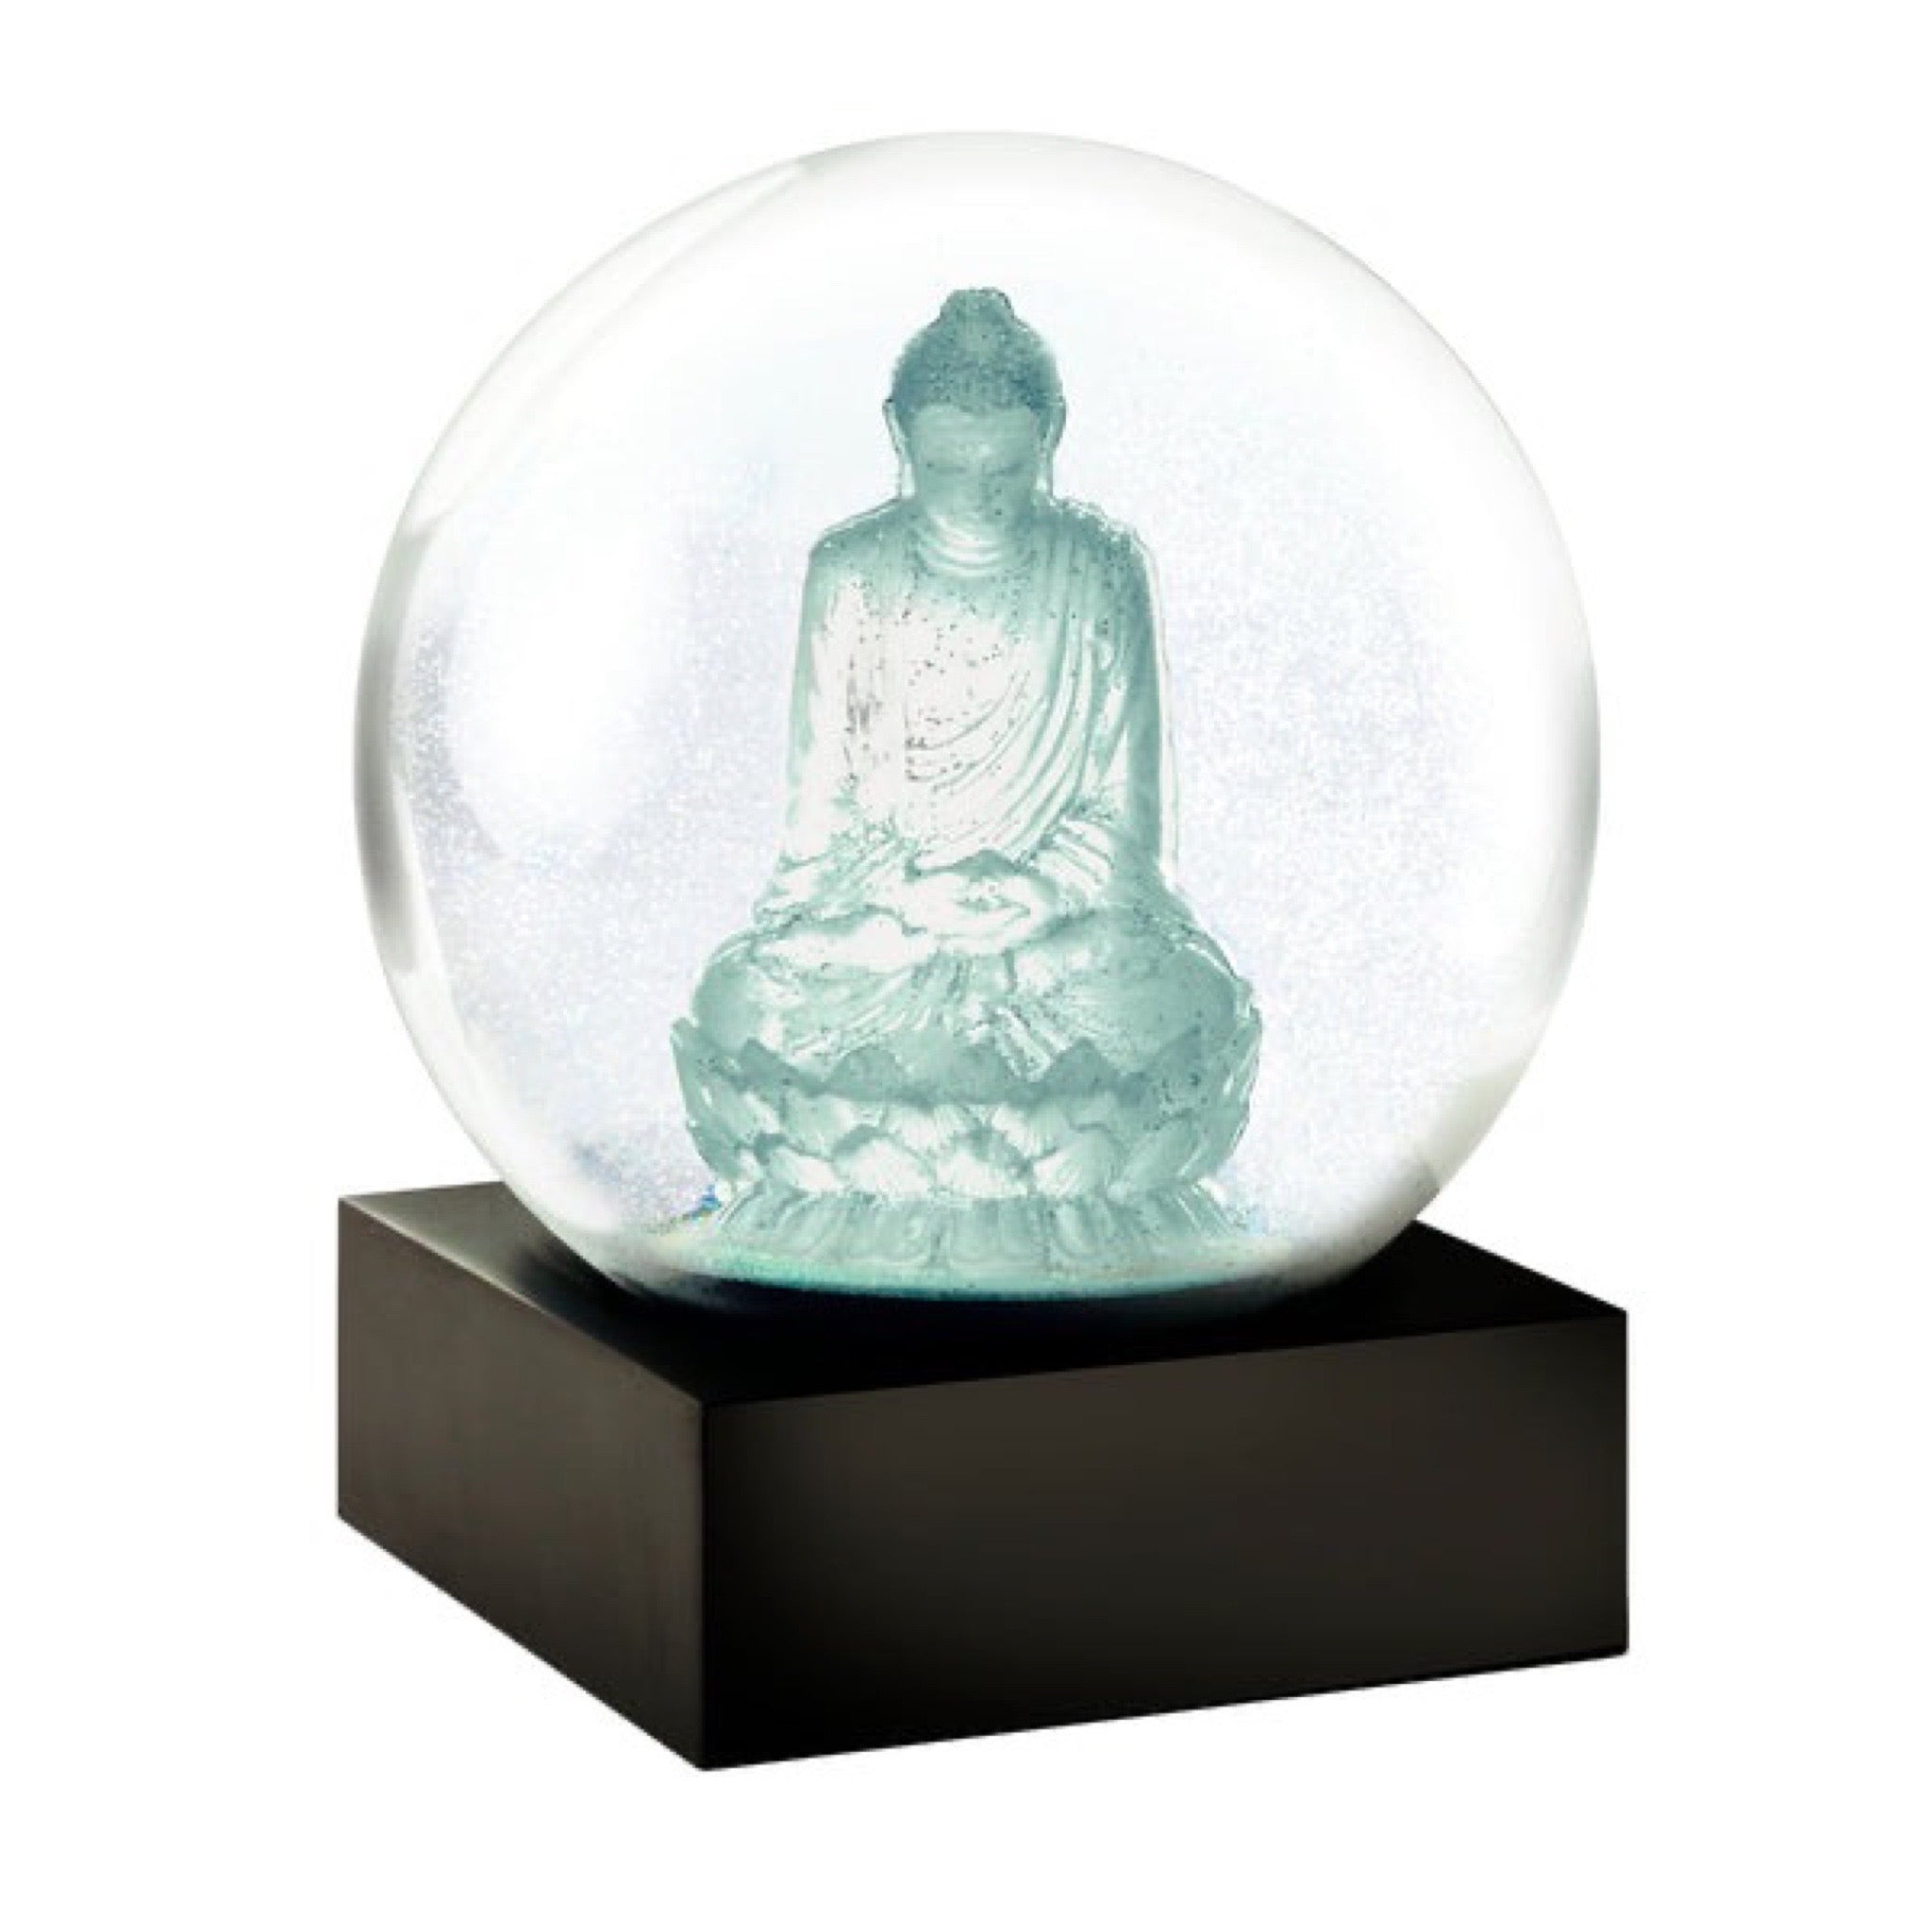 Cool Snow Globes Crystal Buddha Snow Globe available at Shaylula Jewlery & Gifts in Tarrytown, NY and online. The Buddha, his spirit has journeyed through the world for over two millennia. Poets have celebrated him, writers retell the story of his soul's journey. In his honor, this snow globe illuminates him showered in silver wishing compassion and kindness find all who gaze upon him.